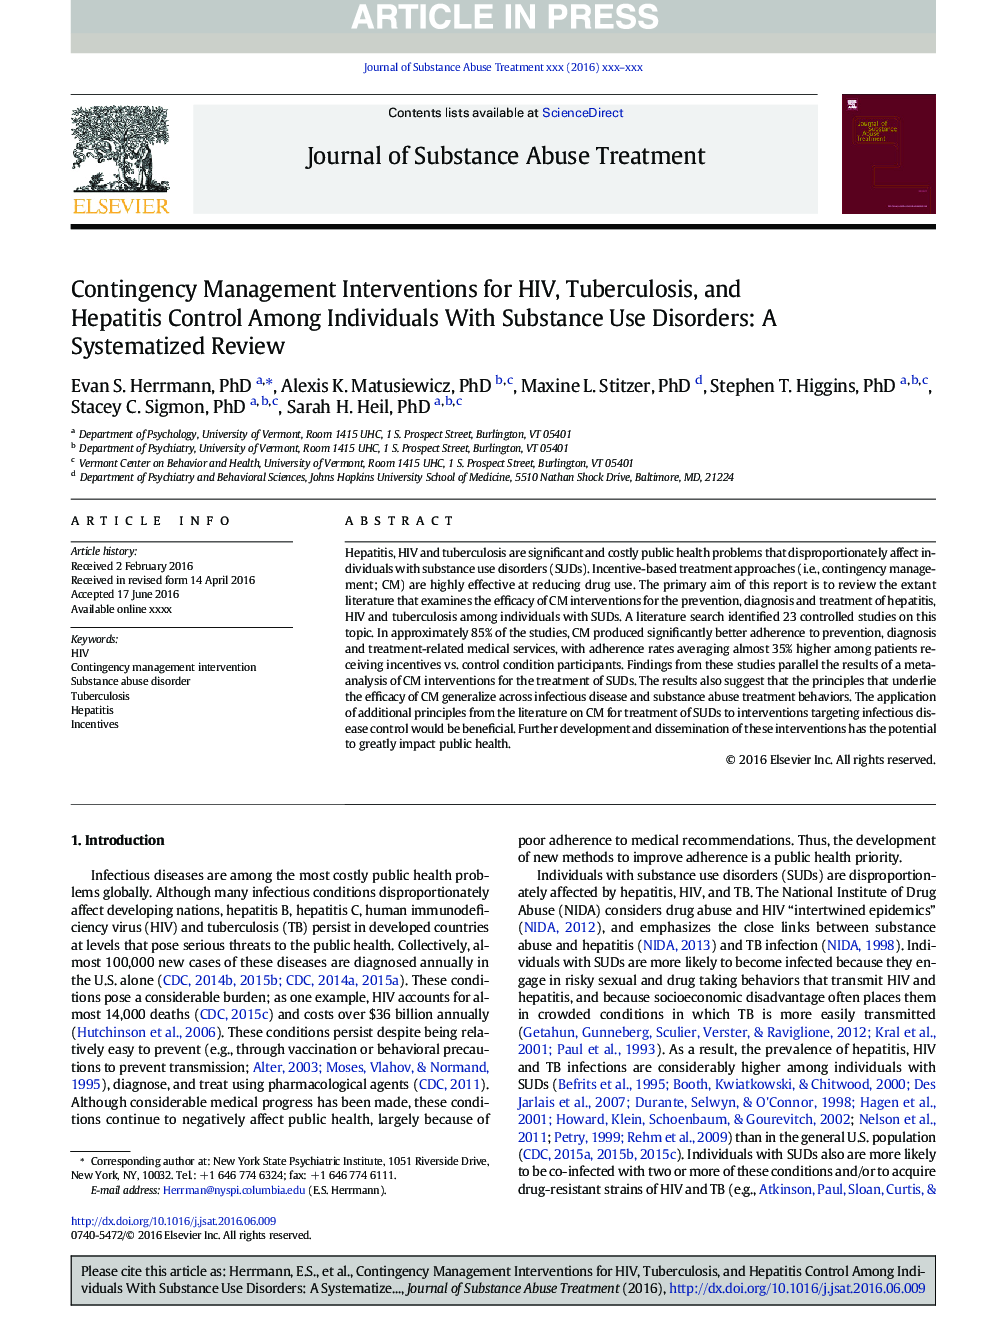 Contingency Management Interventions for HIV, Tuberculosis, and Hepatitis Control Among Individuals With Substance Use Disorders: A Systematized Review